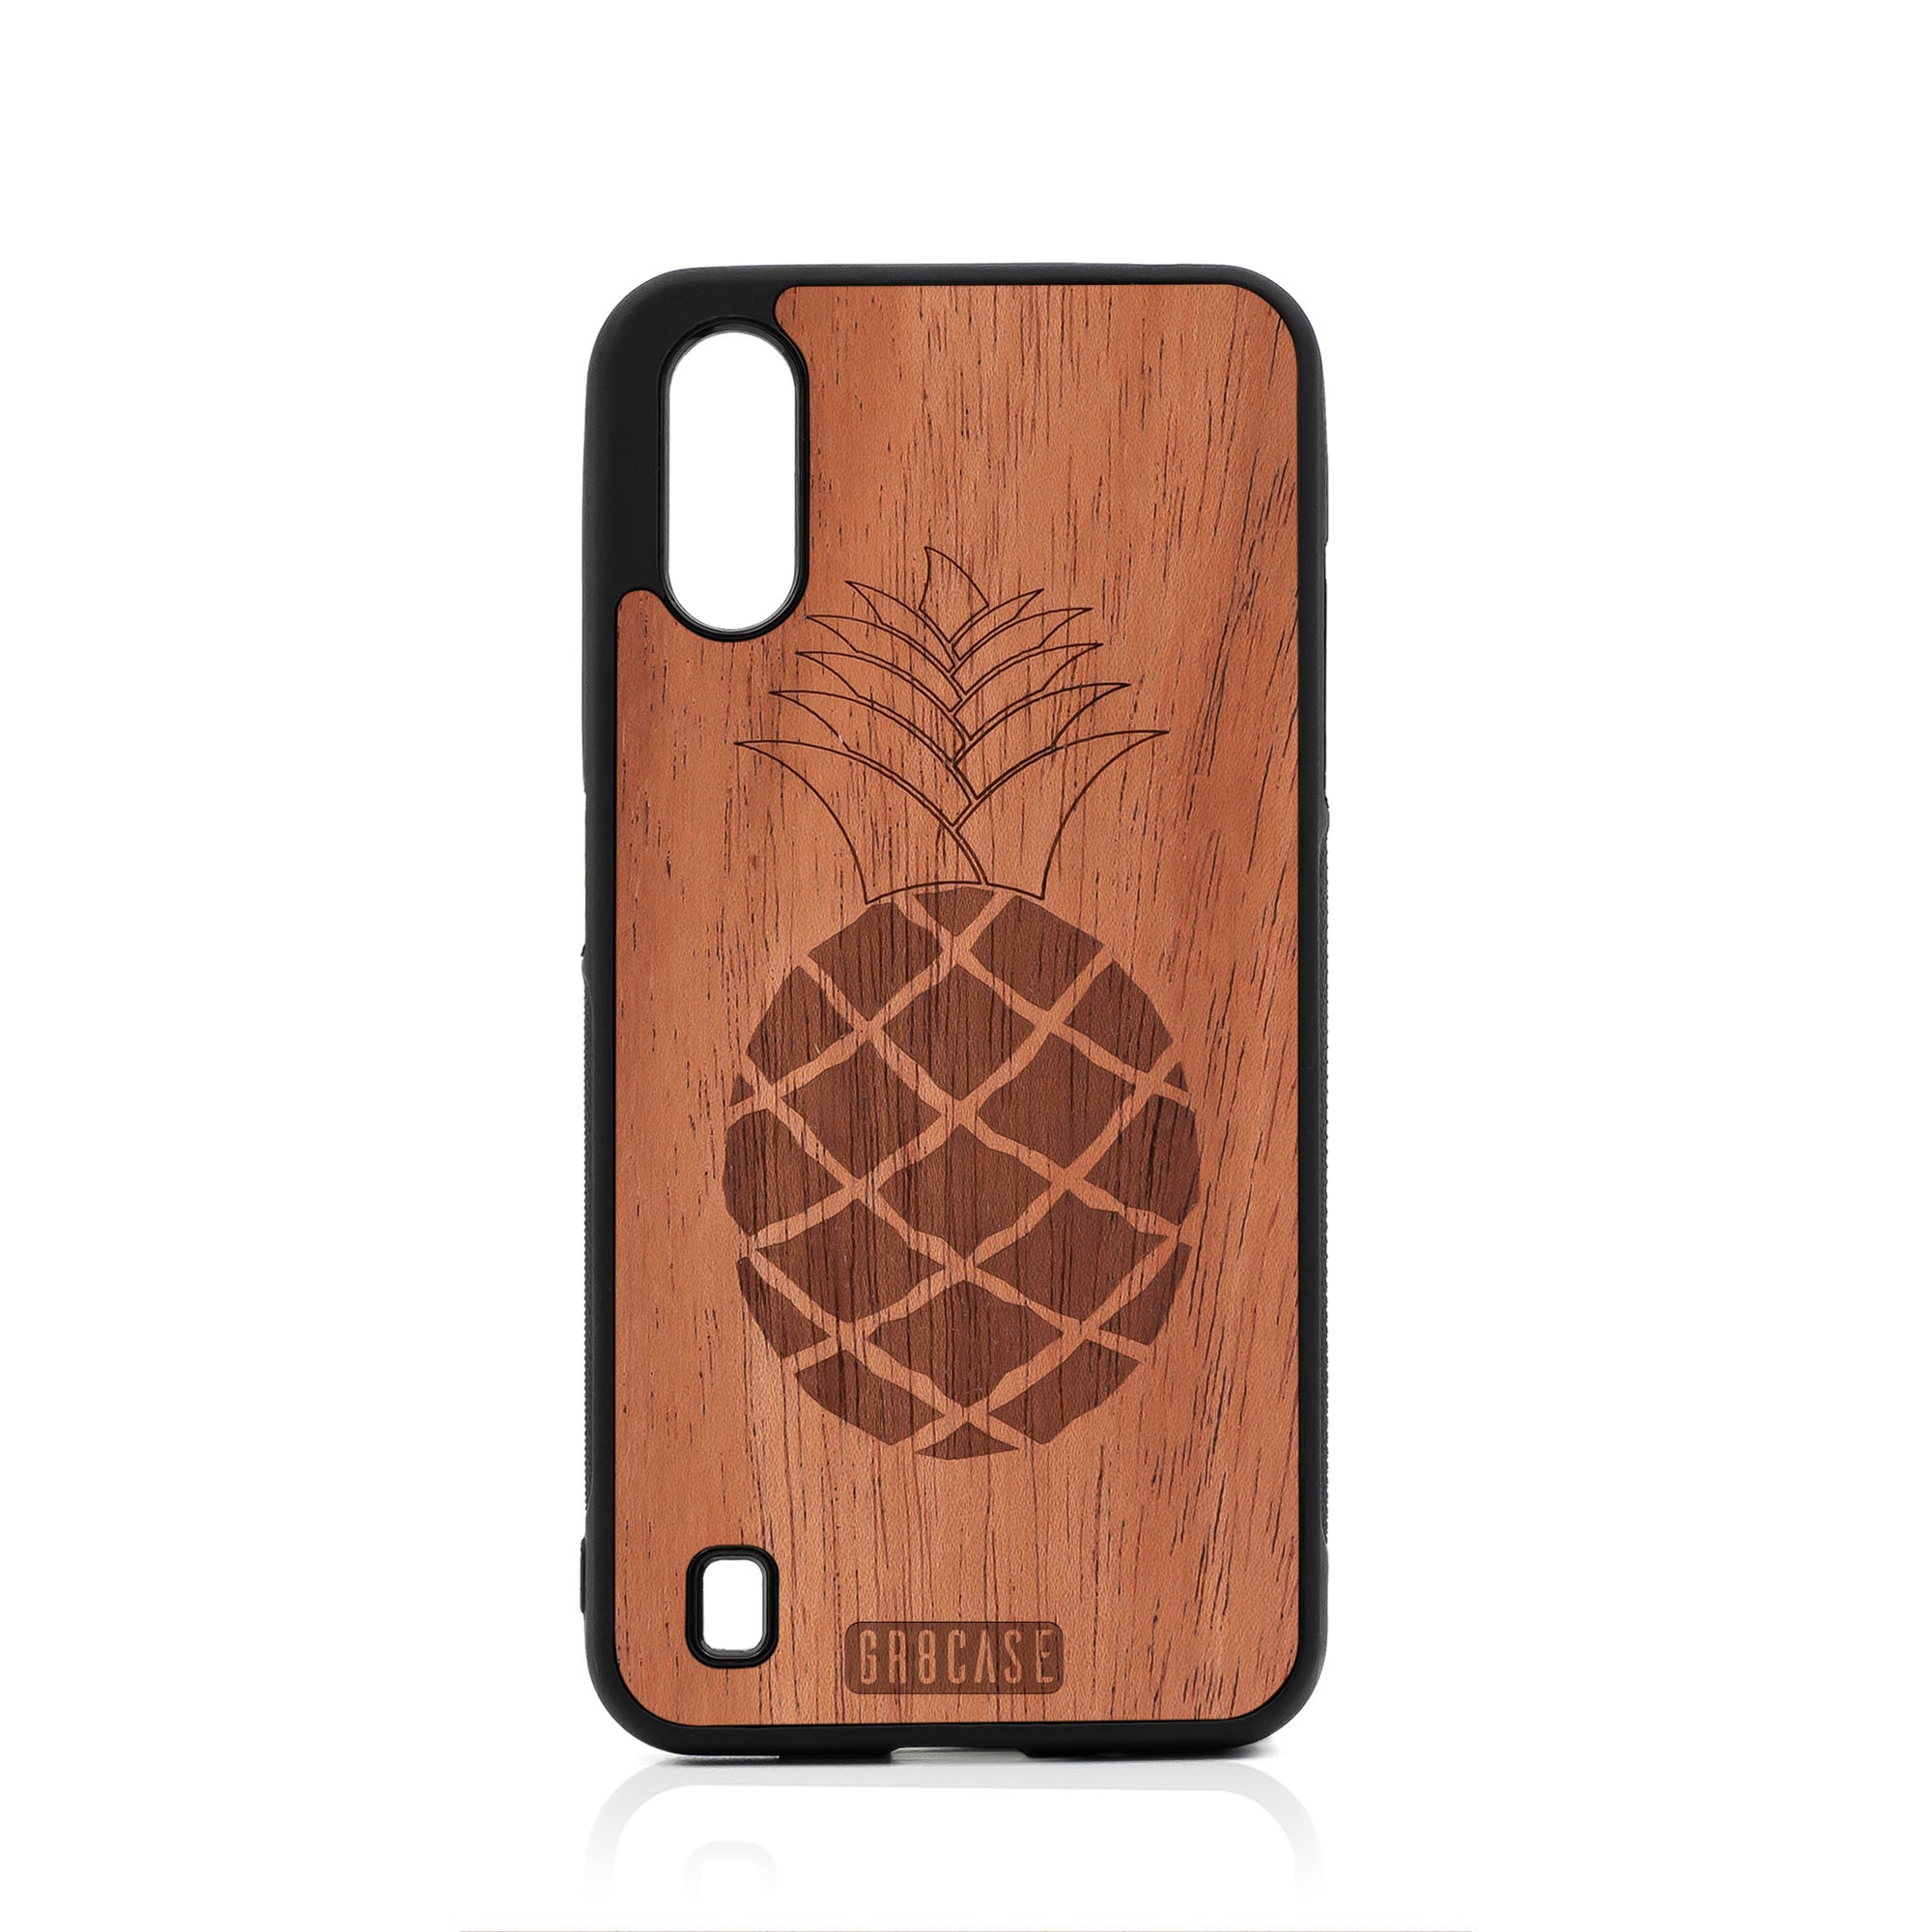 Pineapple Design Wood Case For Samsung Galaxy A01